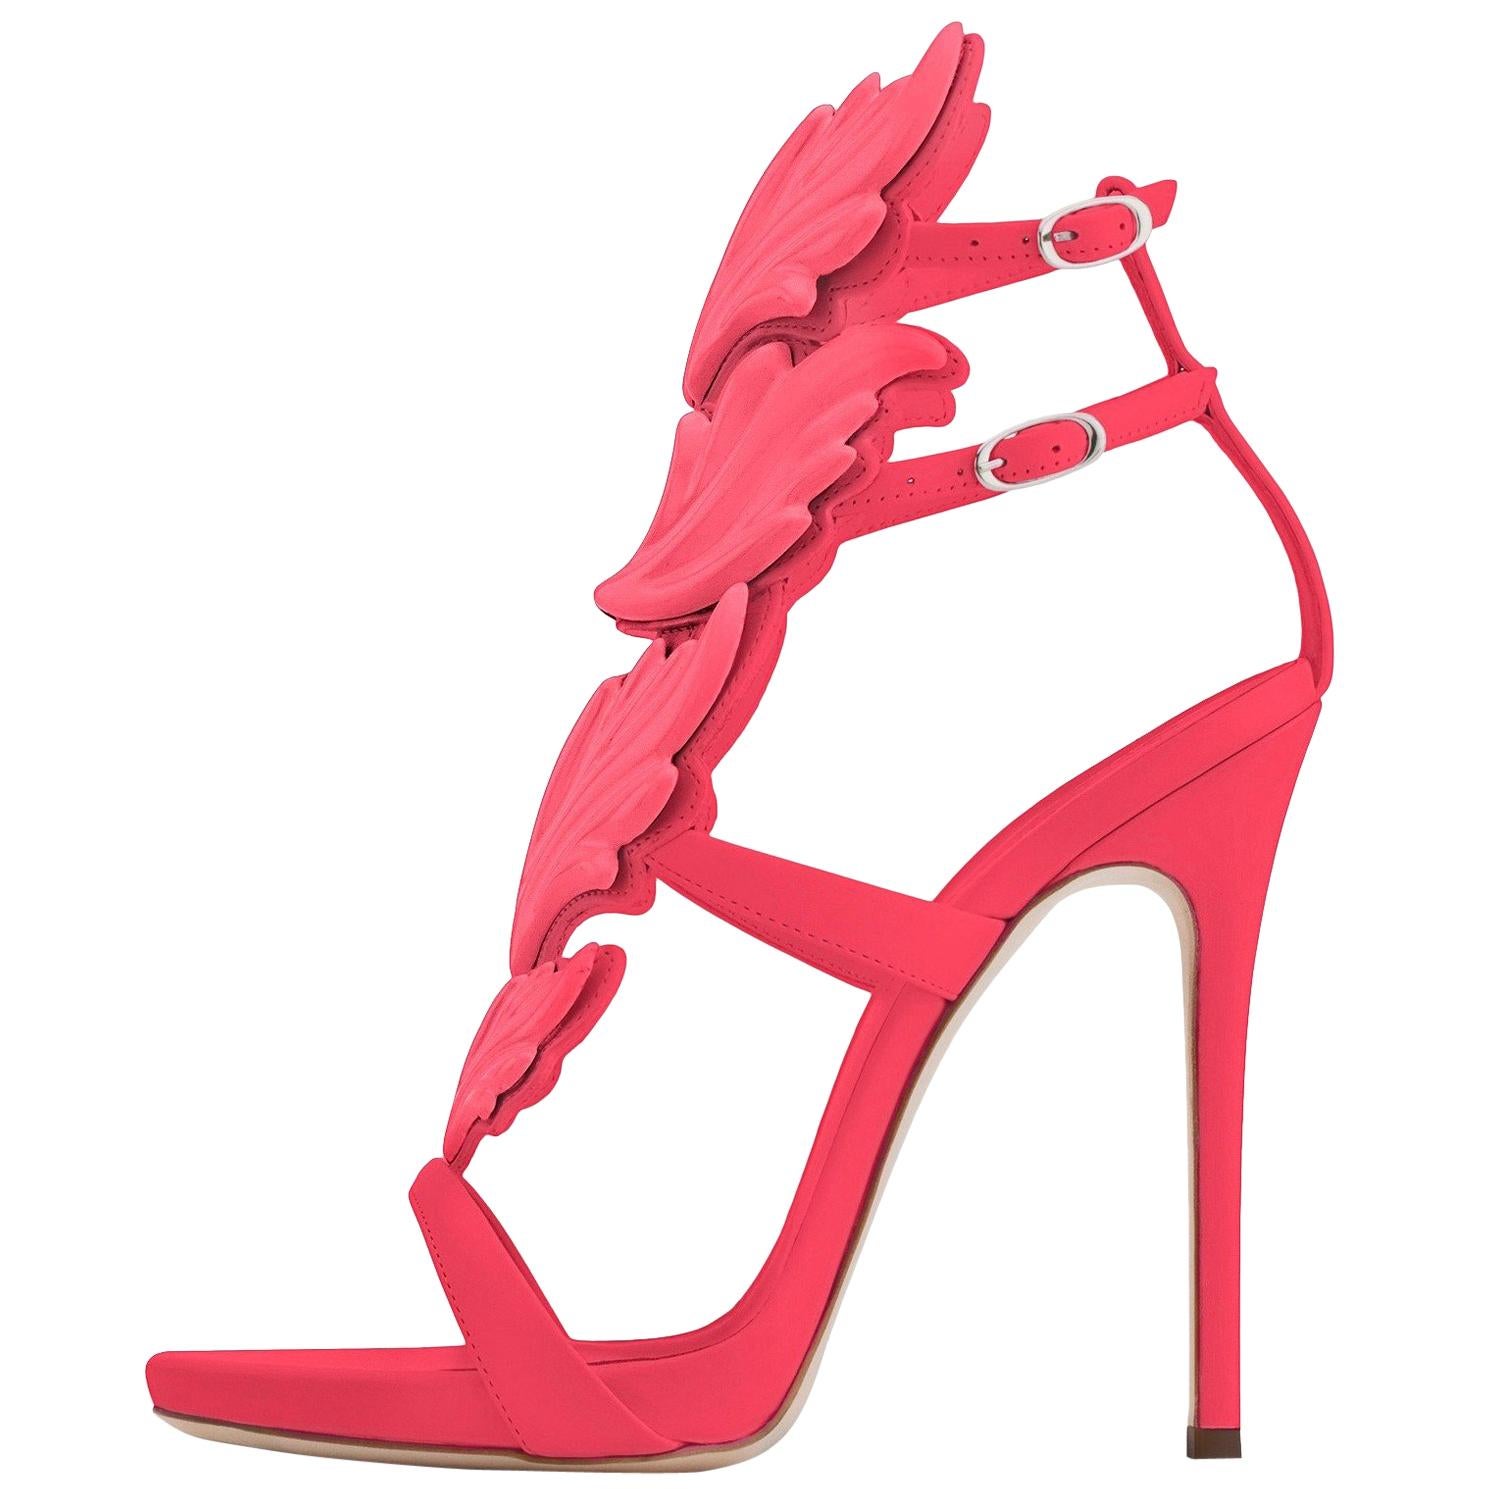 Giuseppe Zanotti NEW Coral Pink Leather Metal Evening Sandals Heels in Box